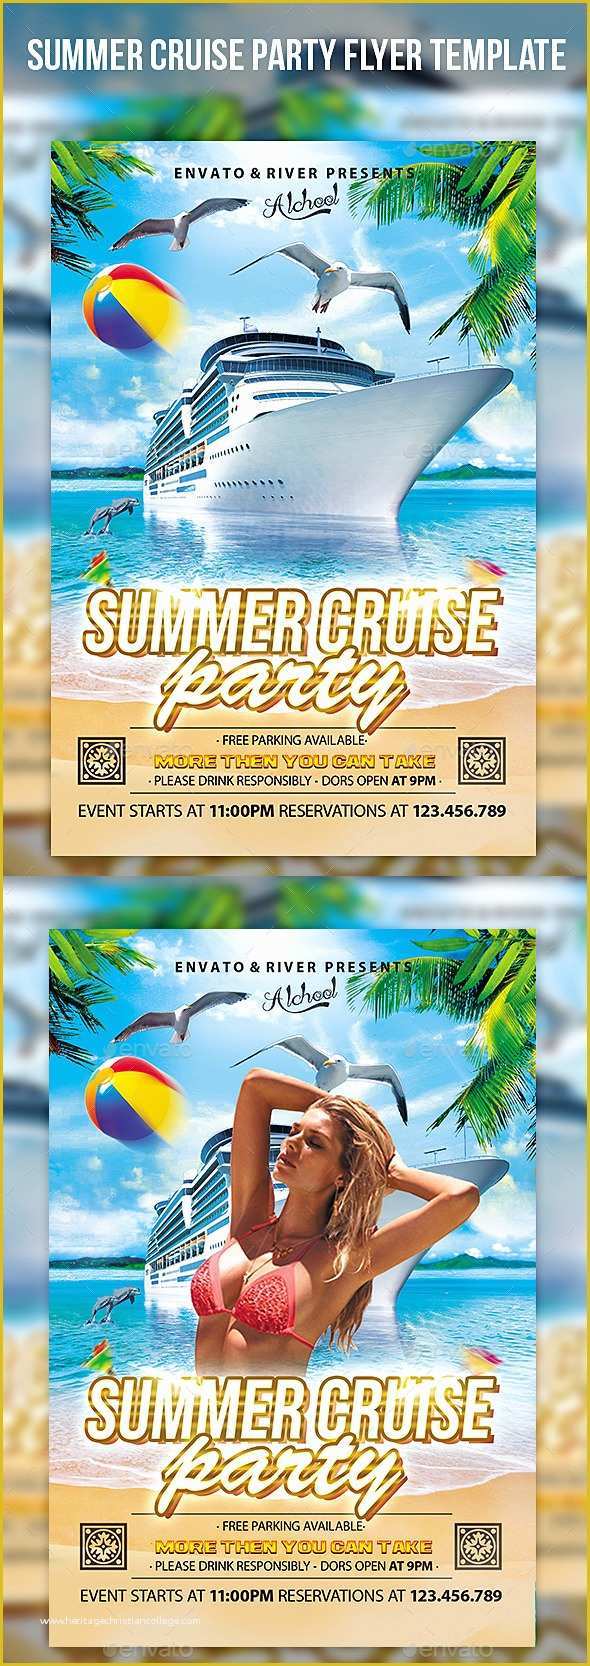 Free Boat Party Flyer Template Of Summer Cruise Party Flyer Template by Cerceicer